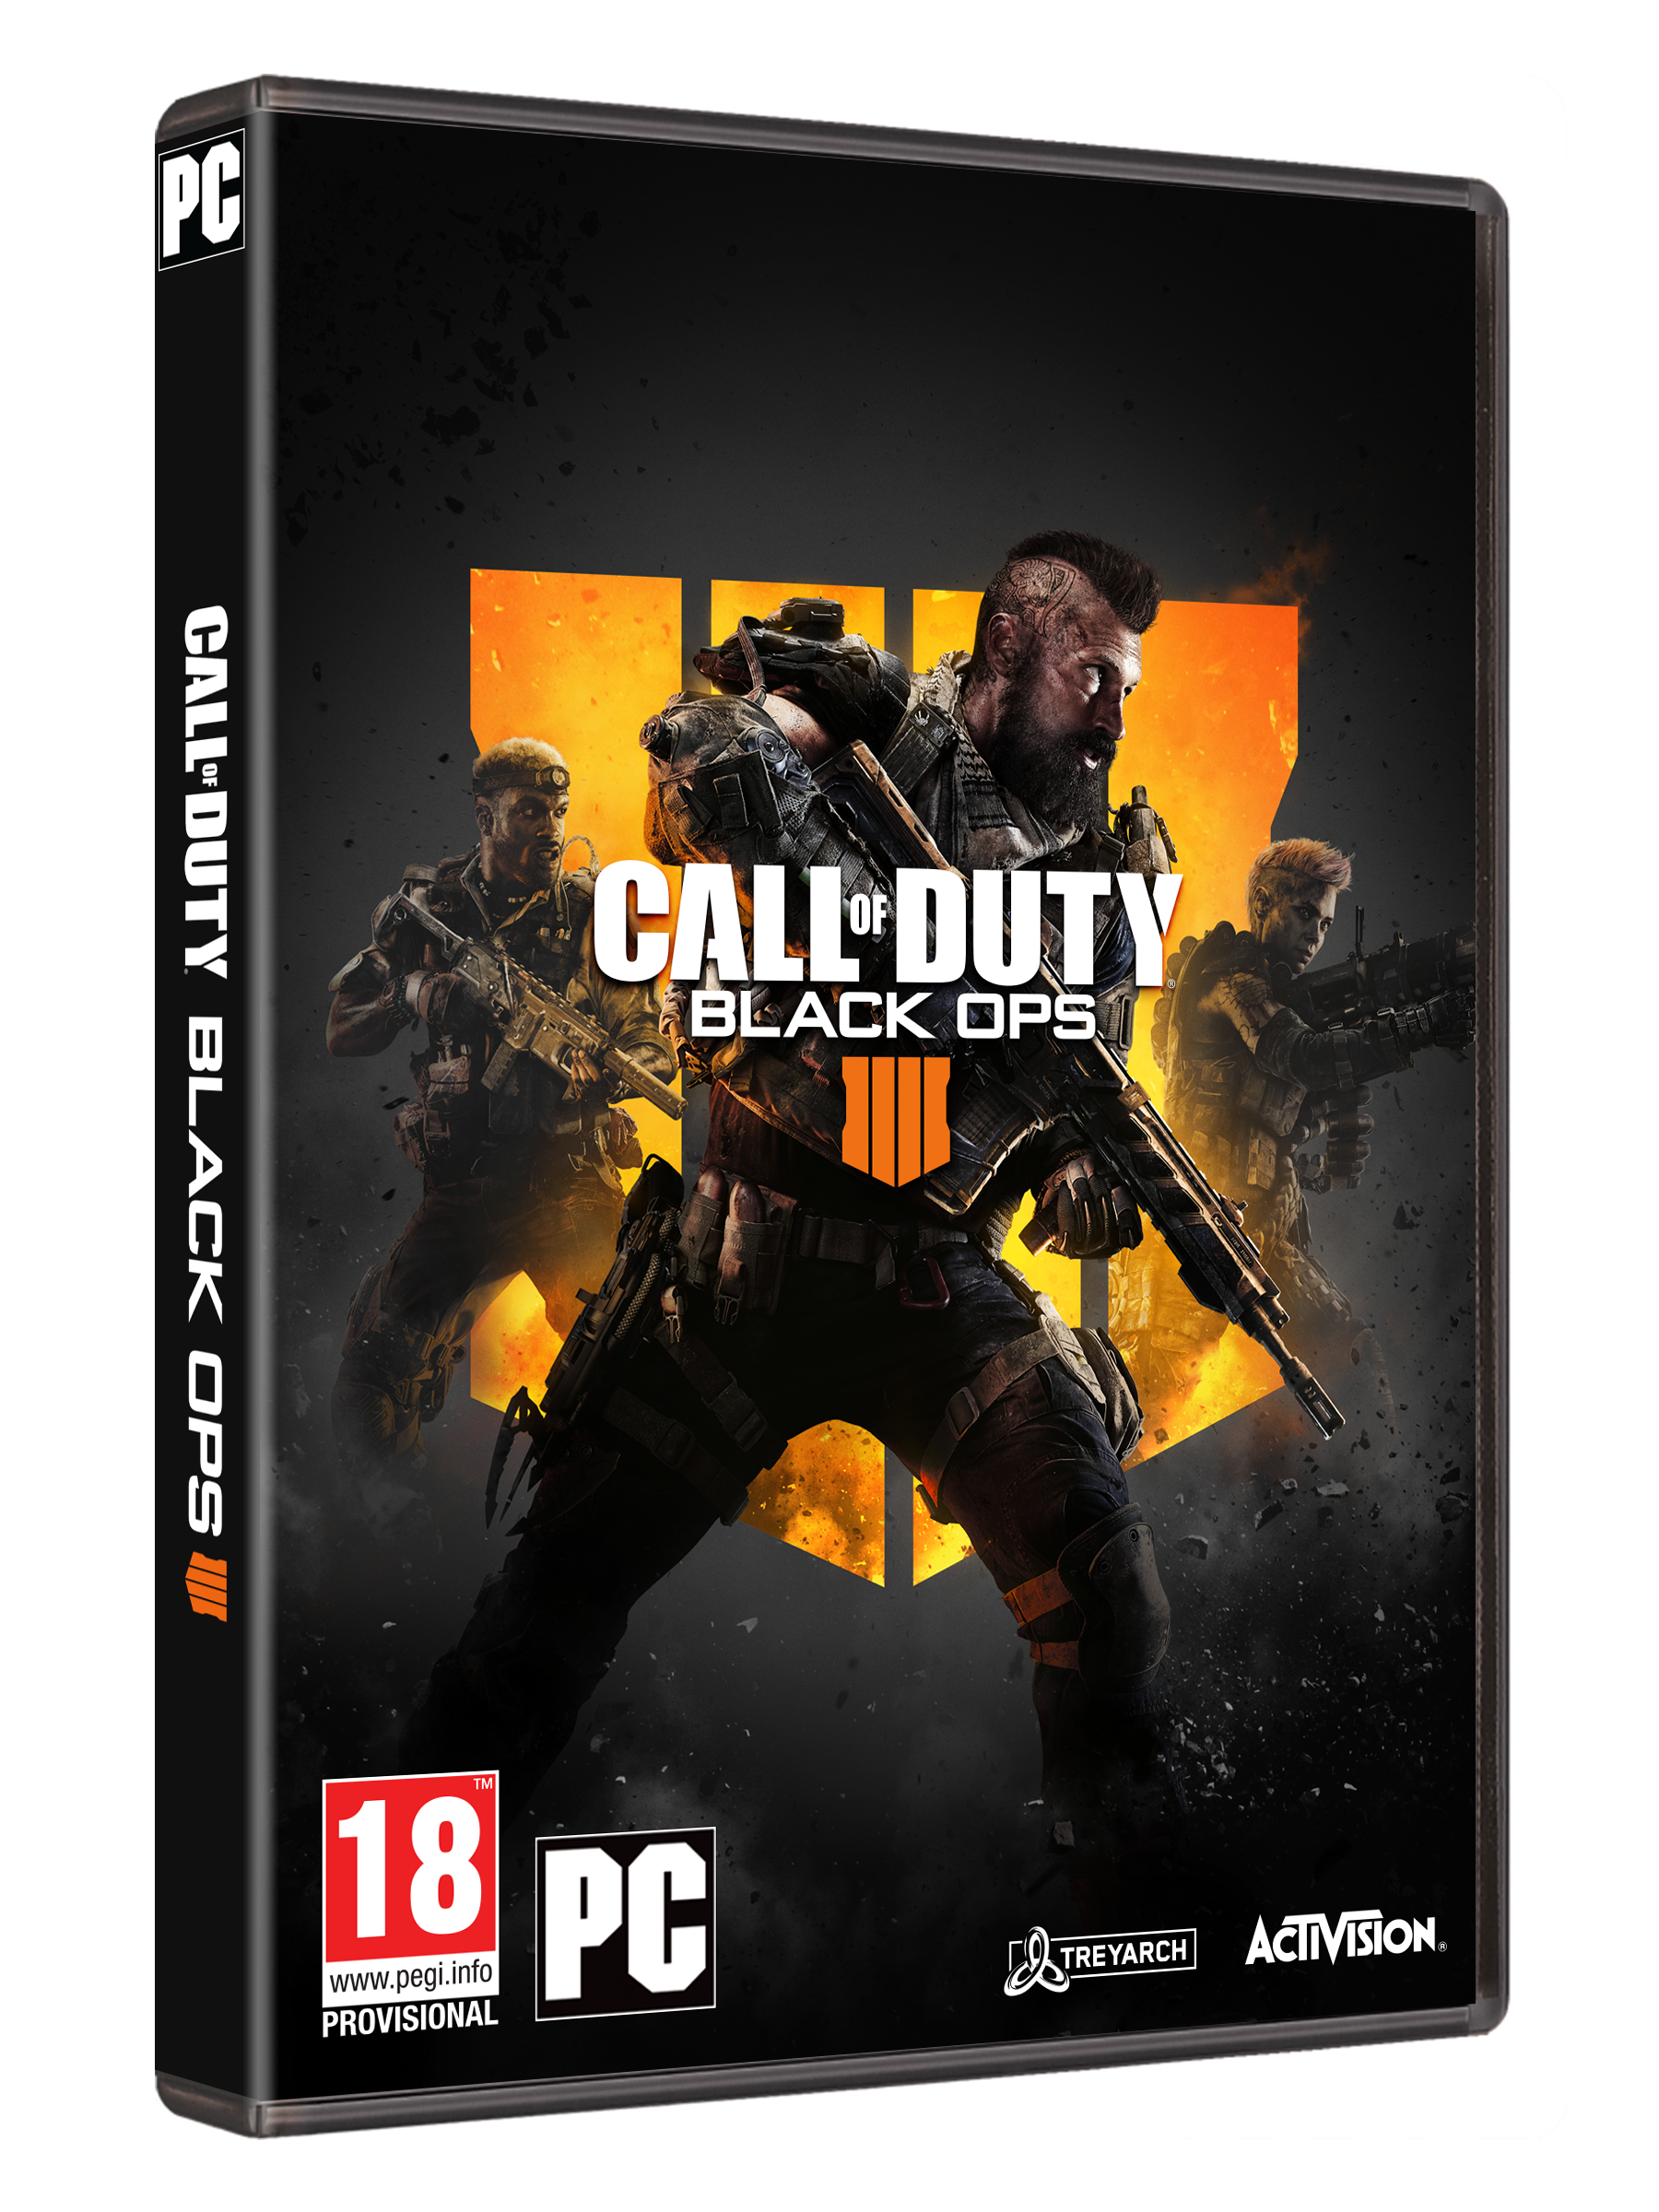 call of duty black ops 4 android